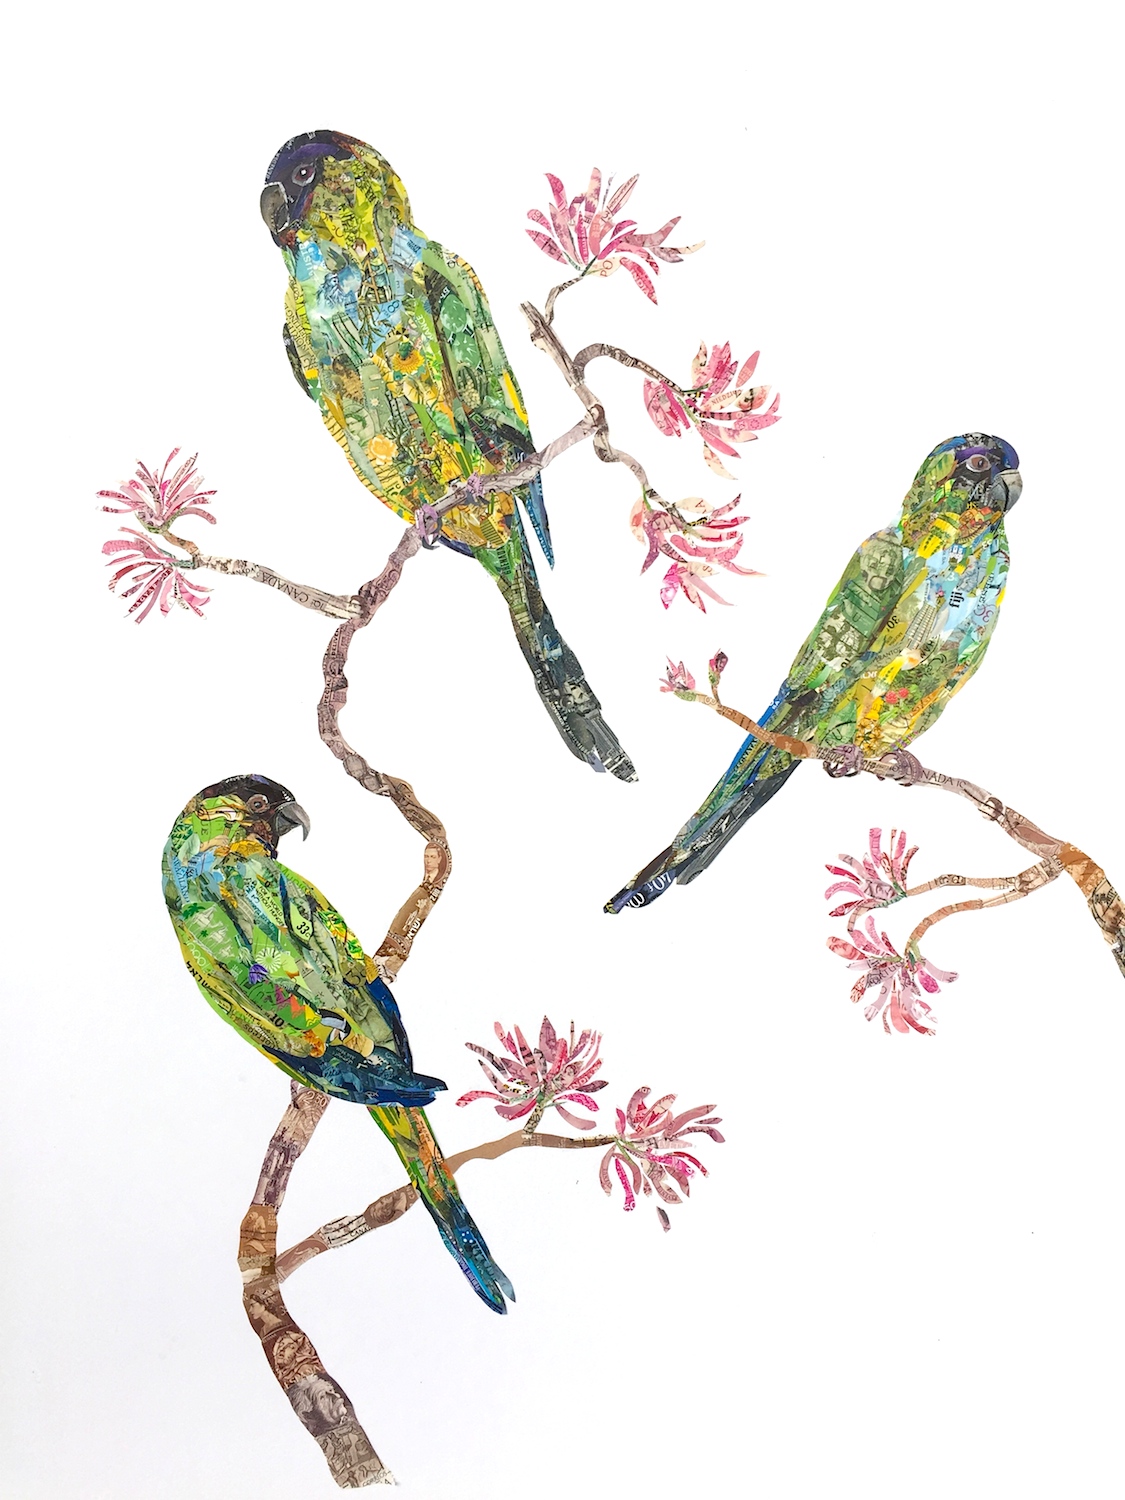 Kerry Buchman, Nandays Parakeets, 2015. Postage stamps on paper, 23.5 x 18 in.